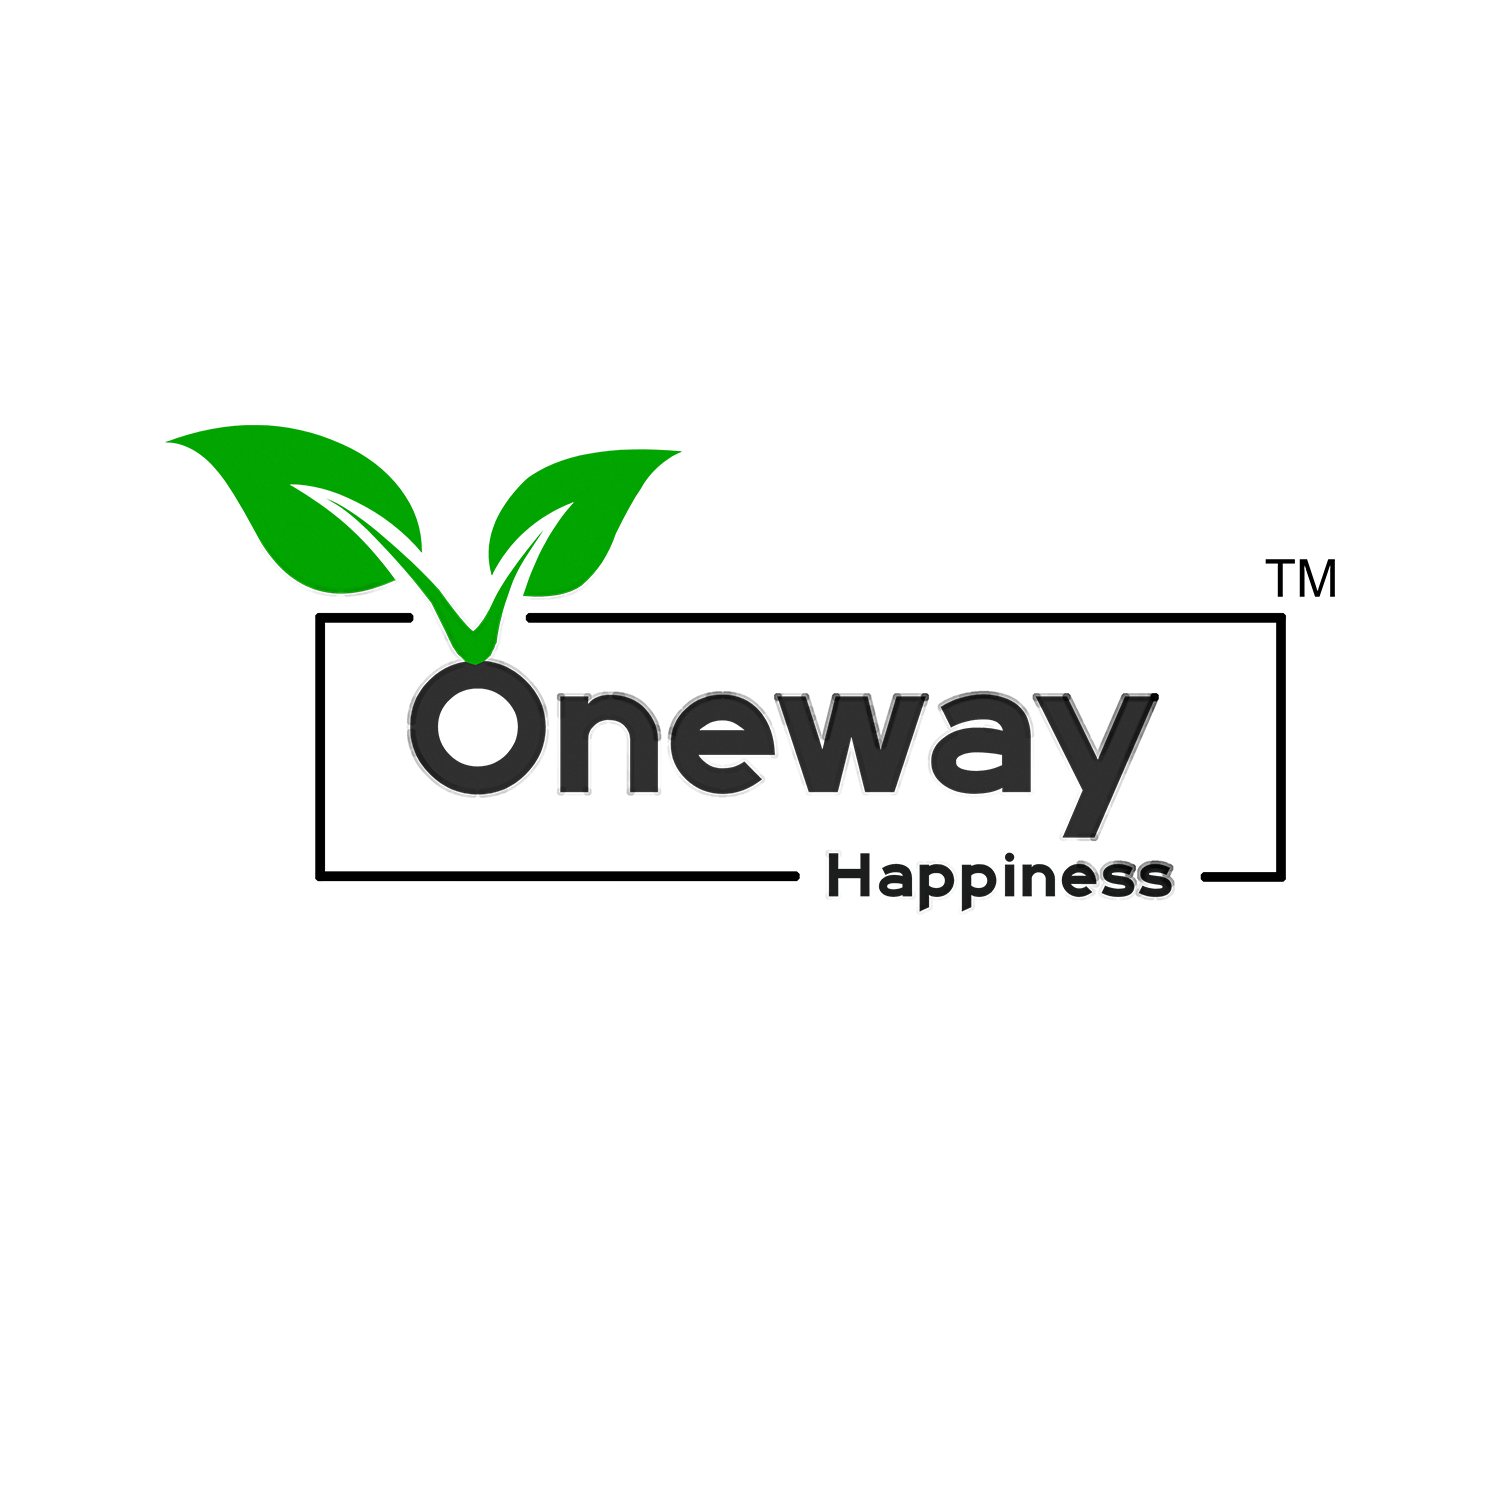 ONEWAY HAPPINESS LLP